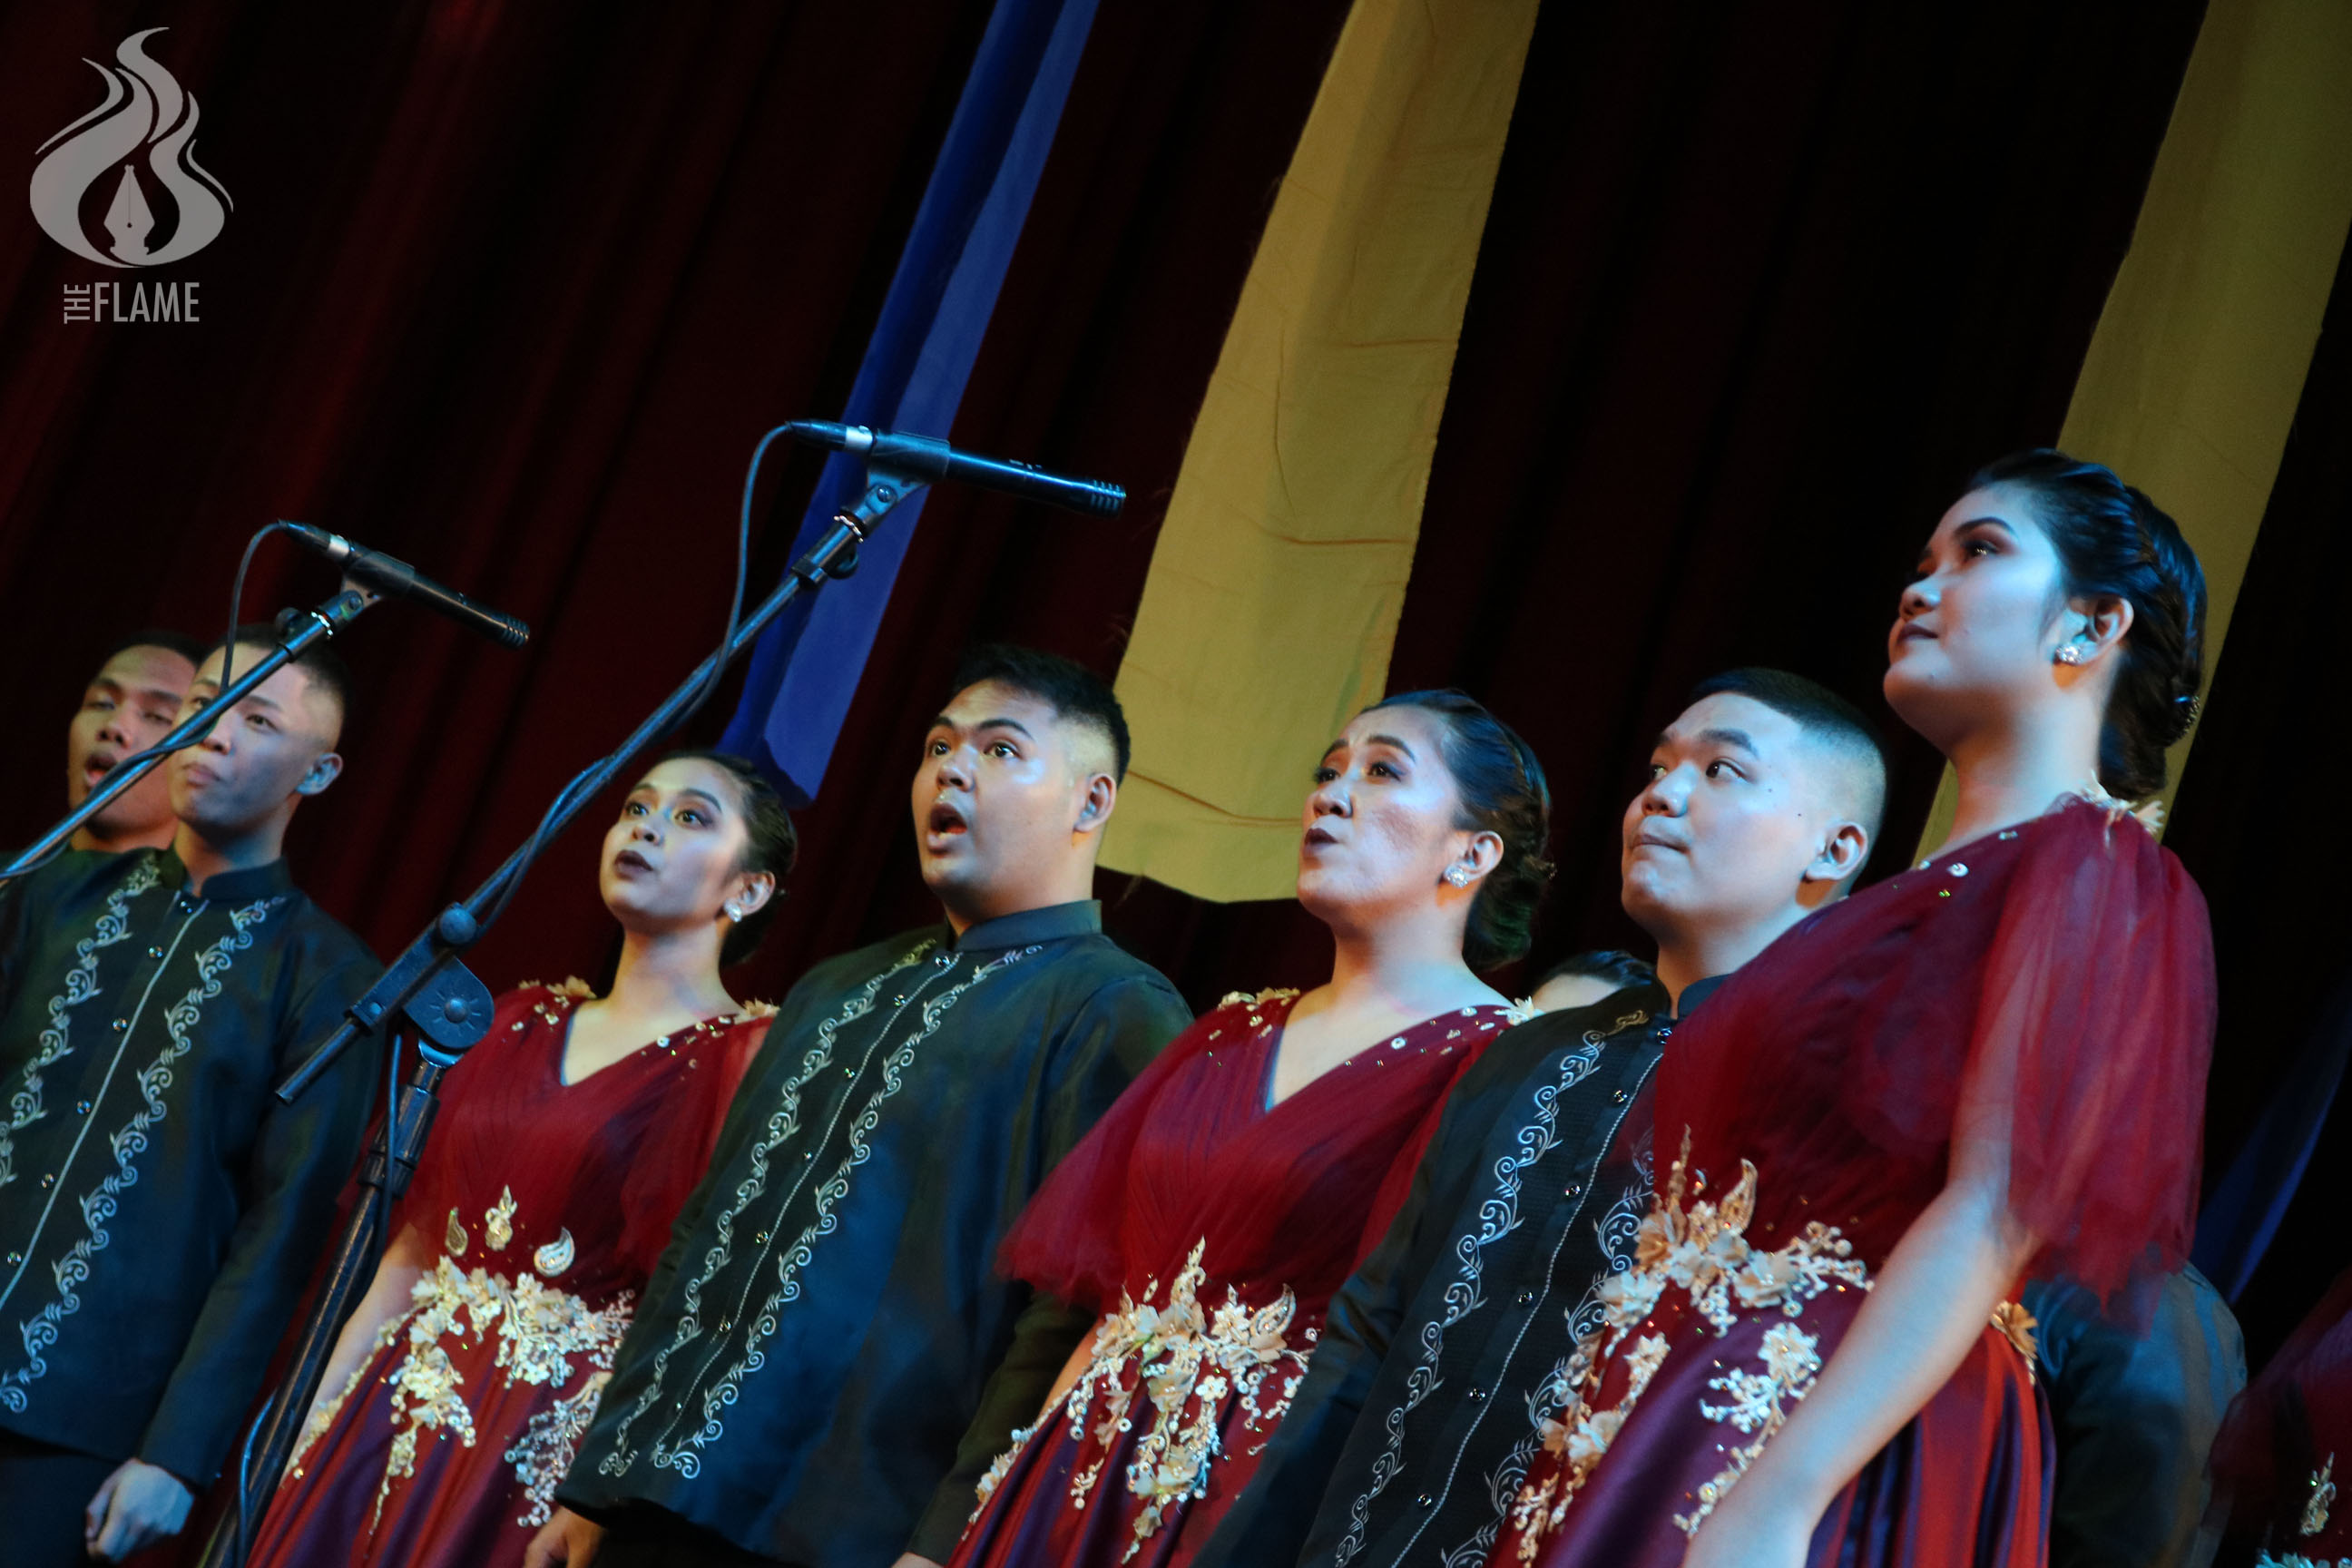 AB Chorale dethroned in Himig Tomasino